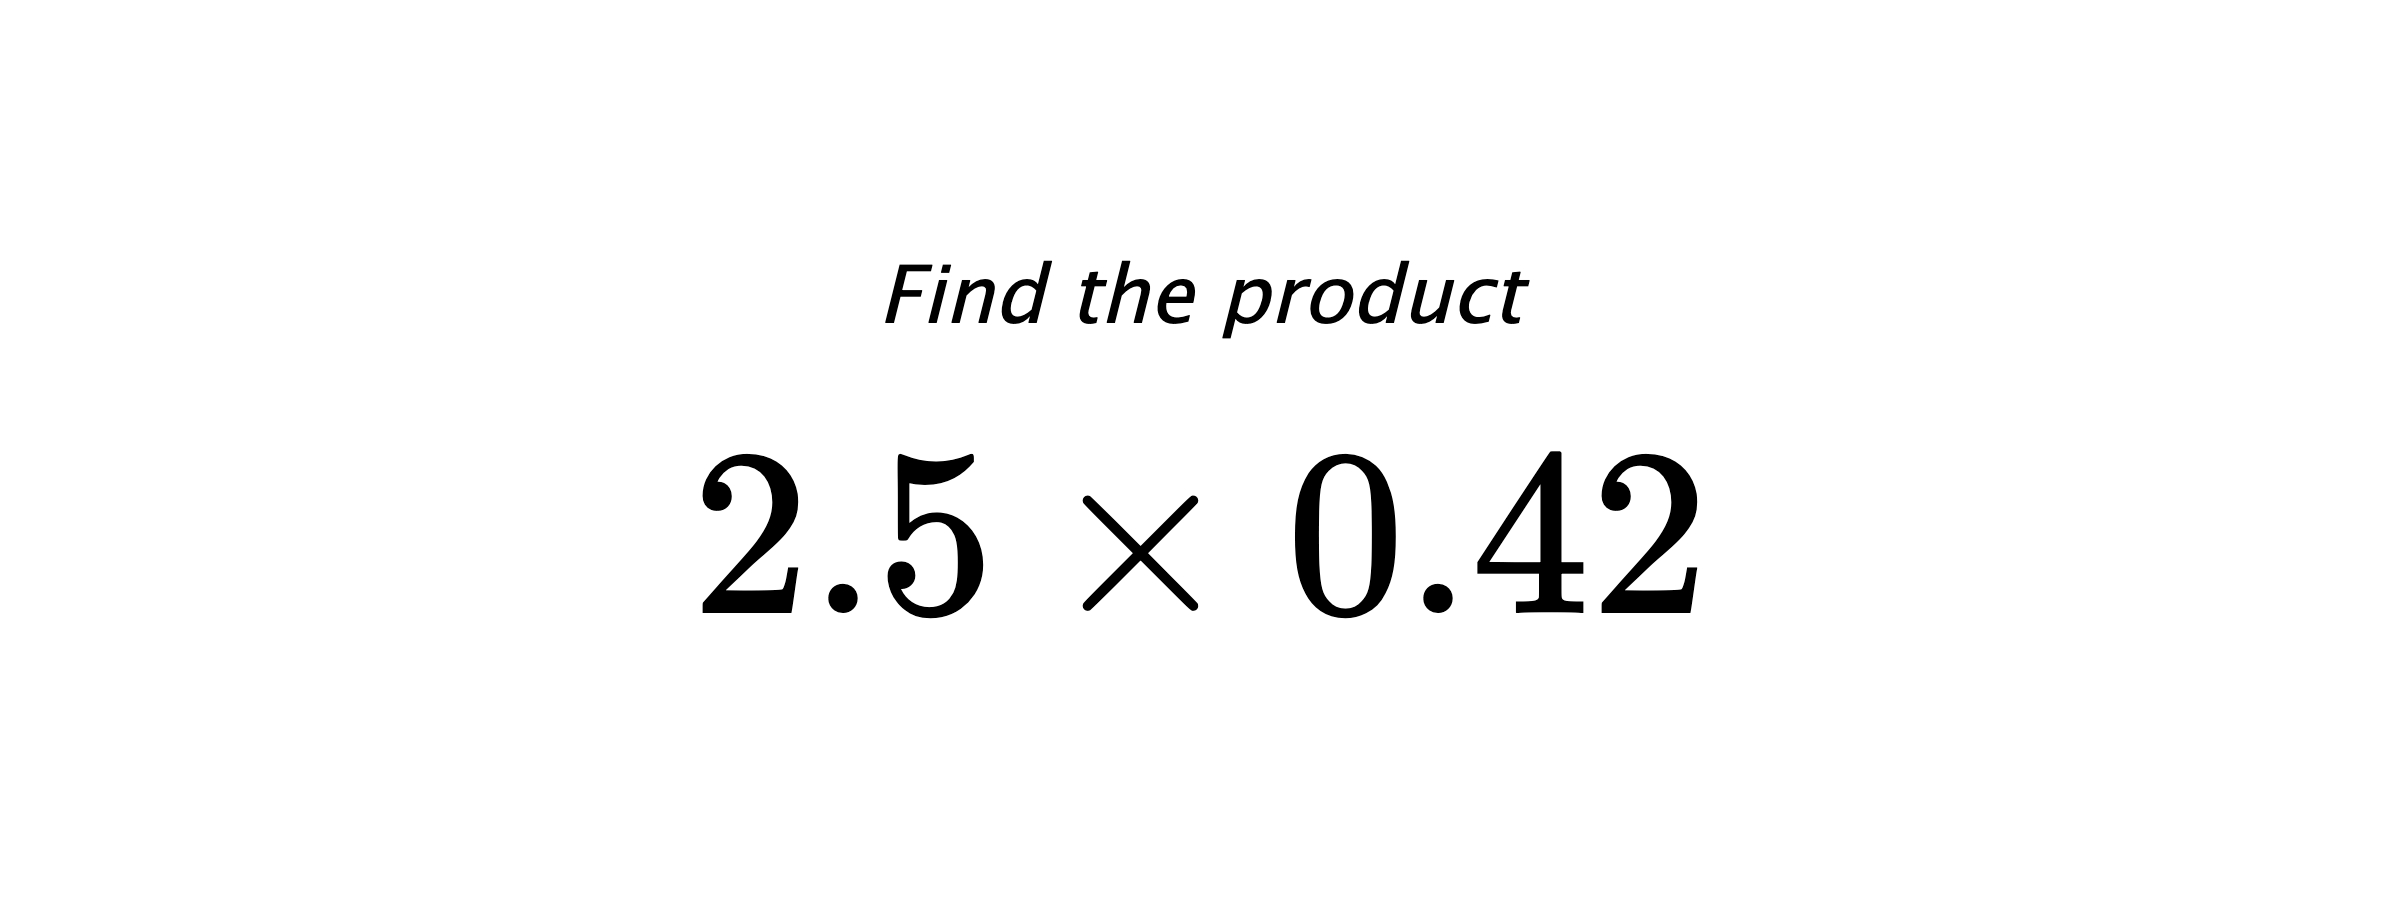 Find the product $ 2.5 \times 0.42 $